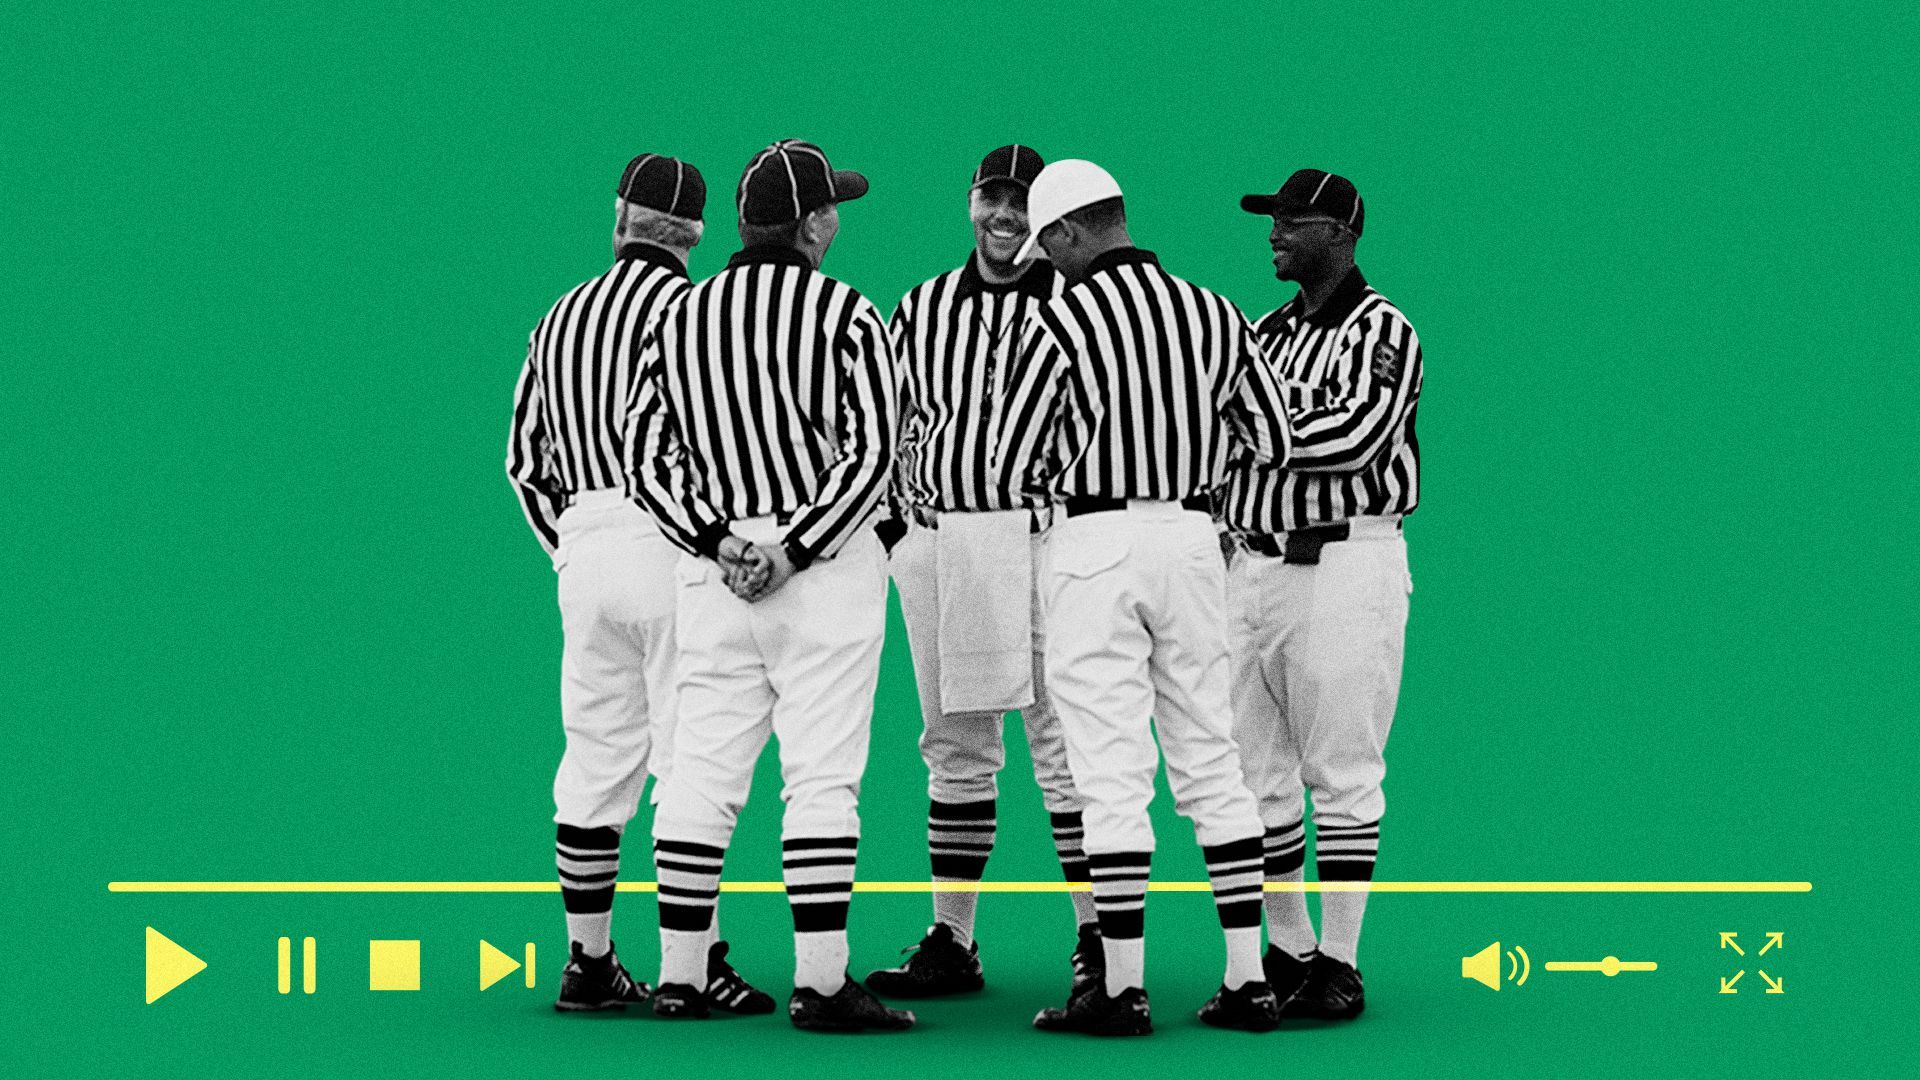 Illustration of a group of football referees standing around a digital streaming progress bar